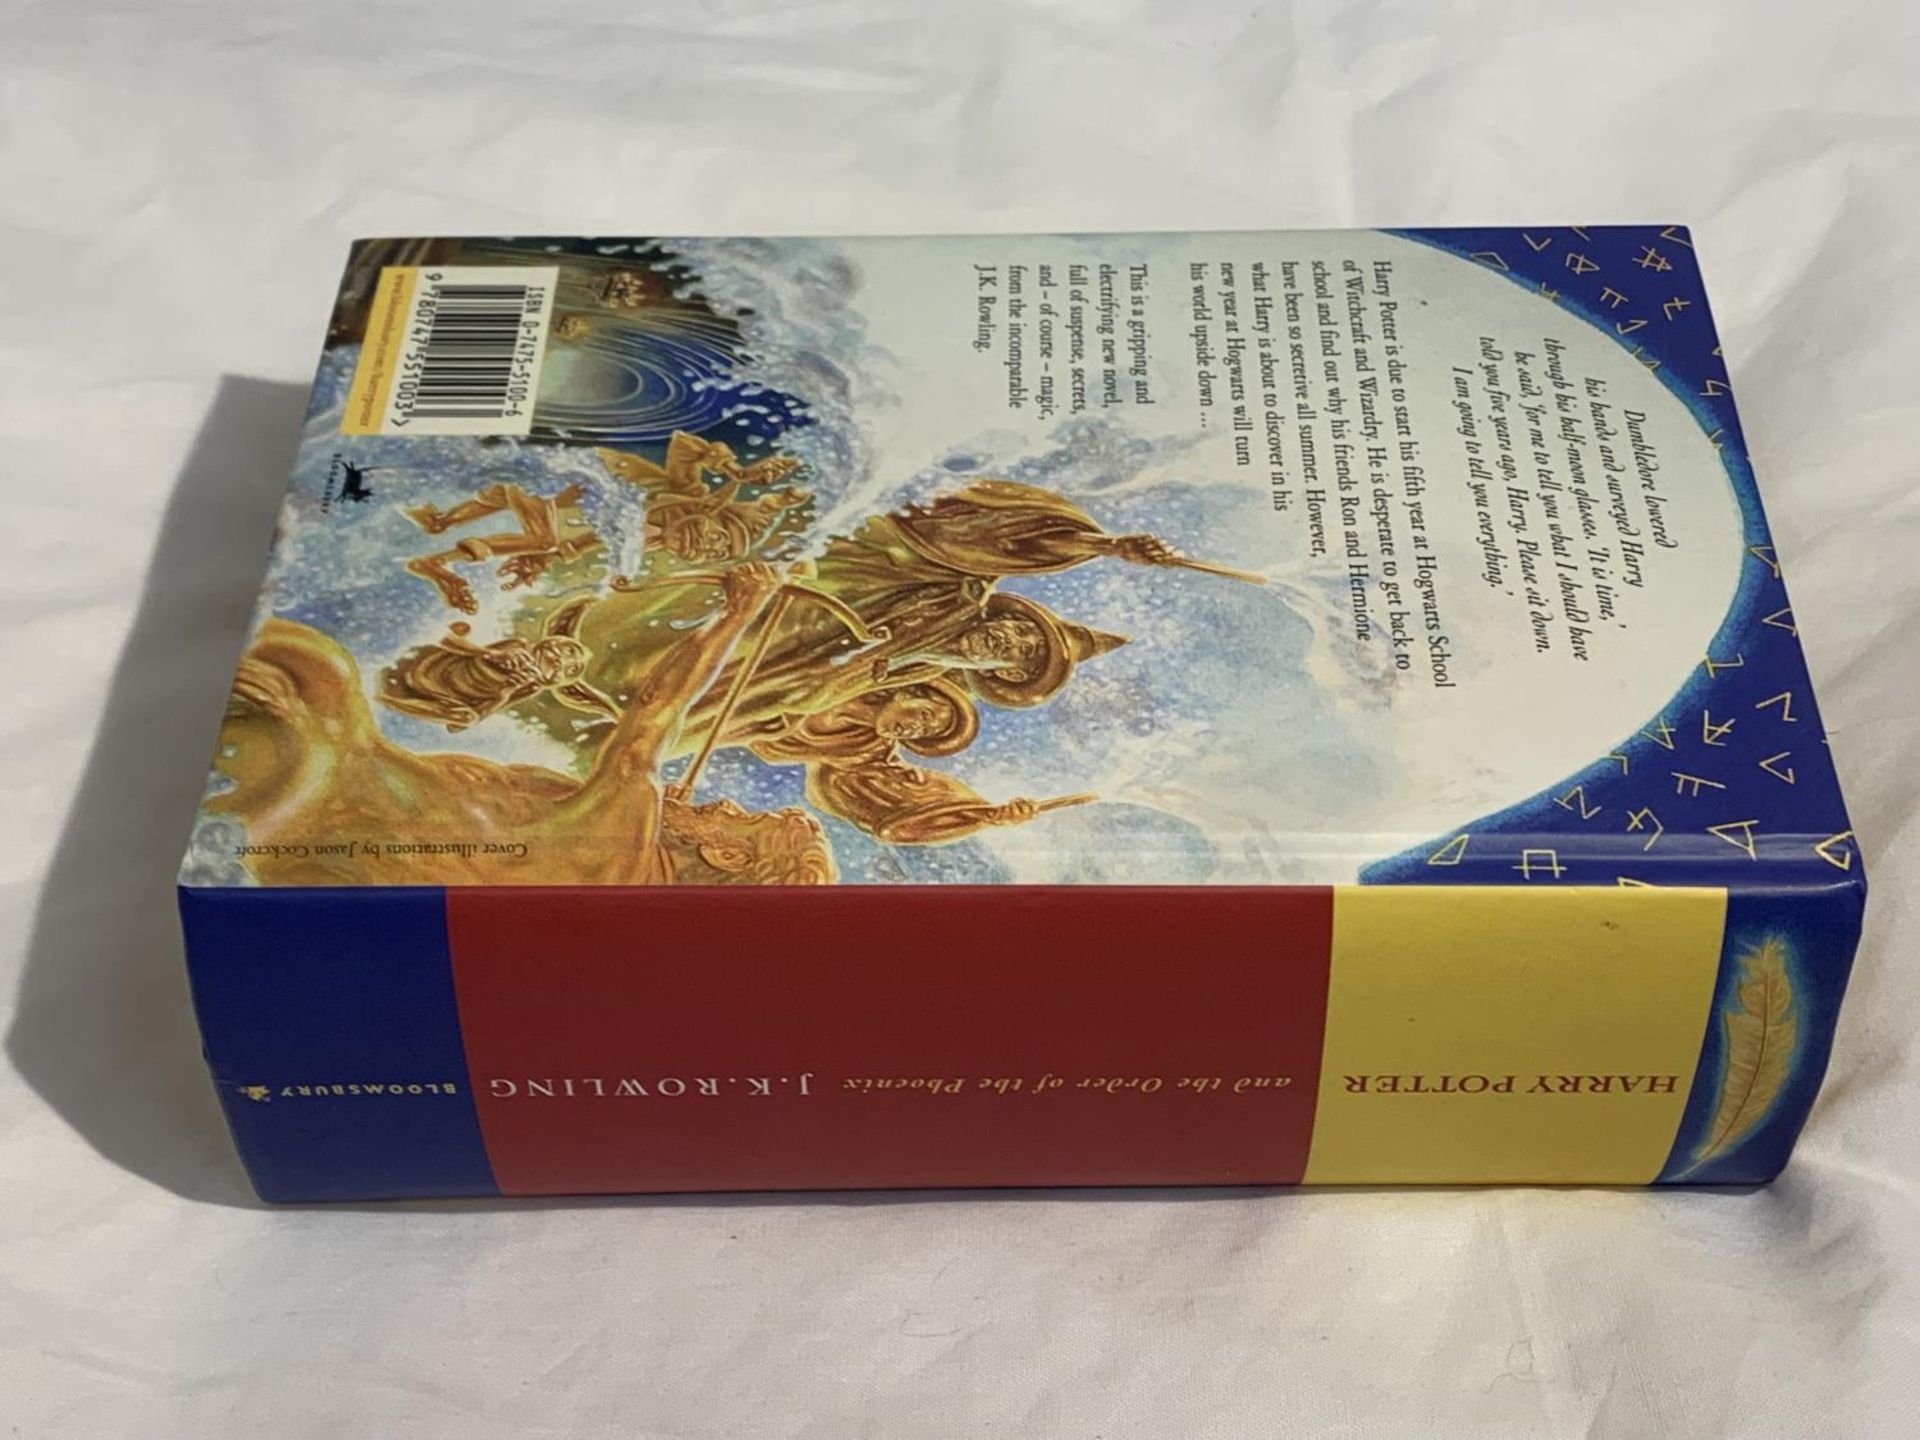 A HARDBACK FIRST EDITION - HARRY POTTER AND THE ORDER OF THE PHOENIX, NO DUST JACKET BY J.K. - Image 3 of 5